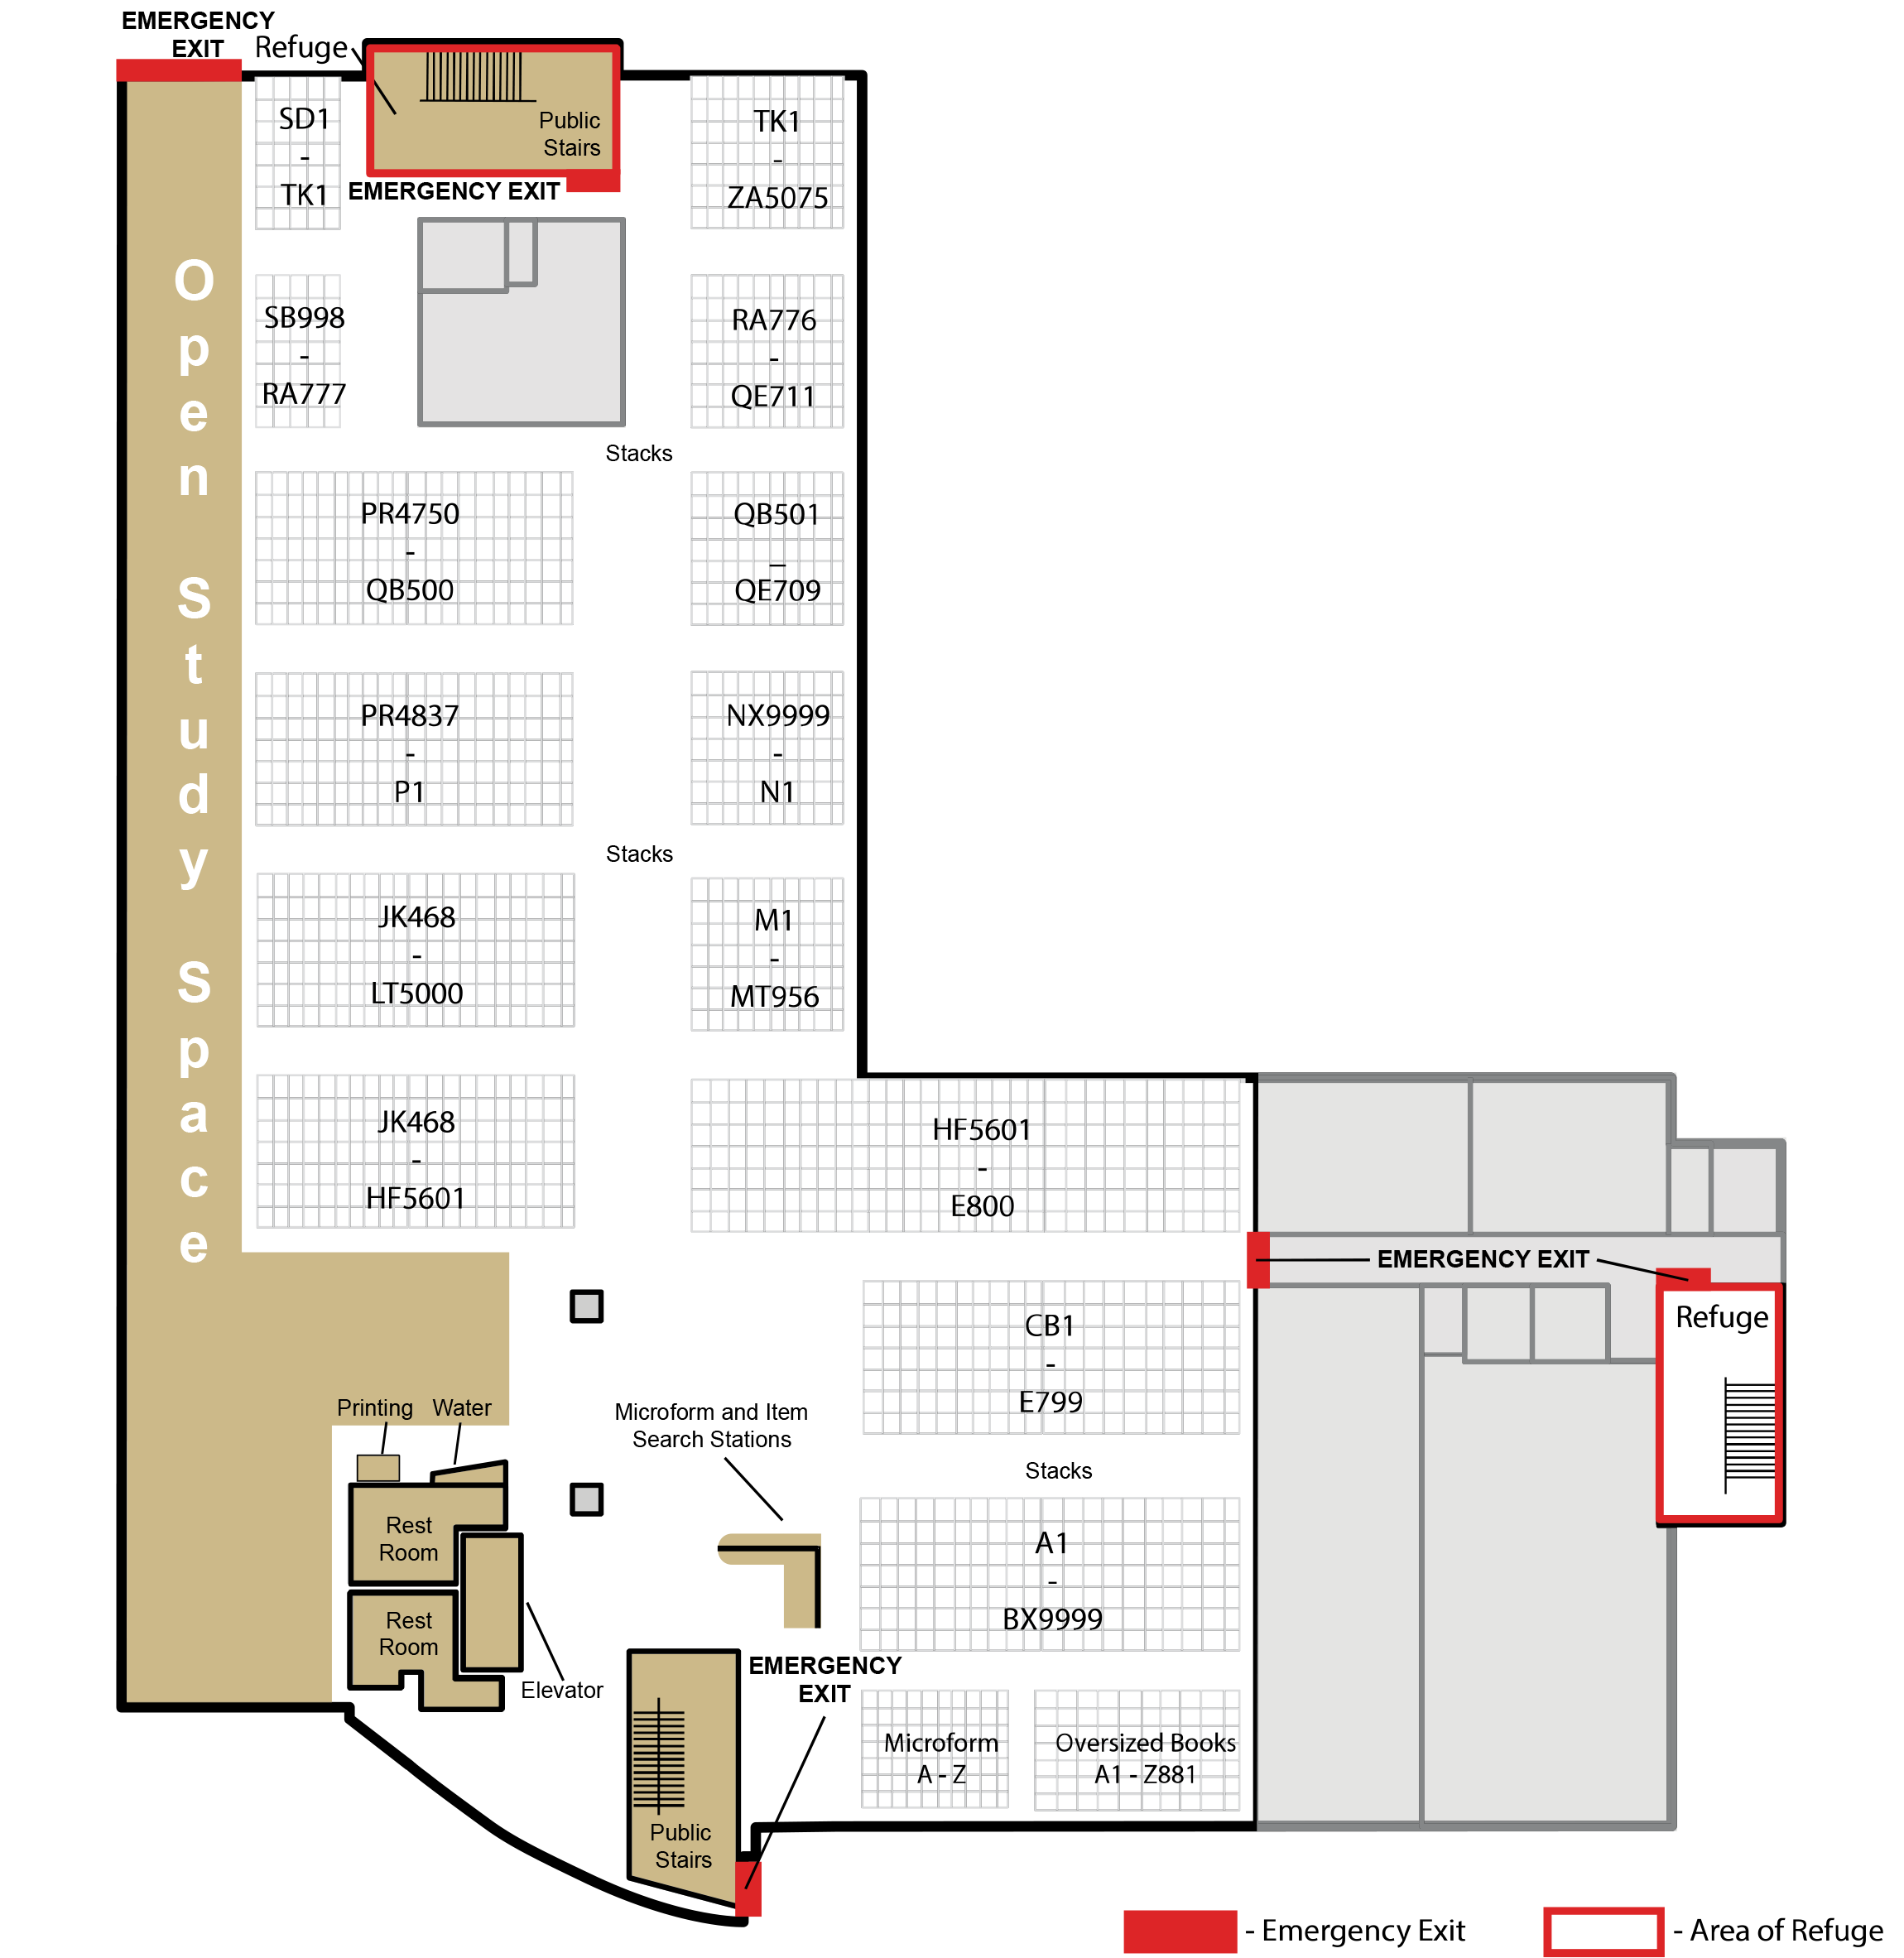 A map of the ground floor of the library